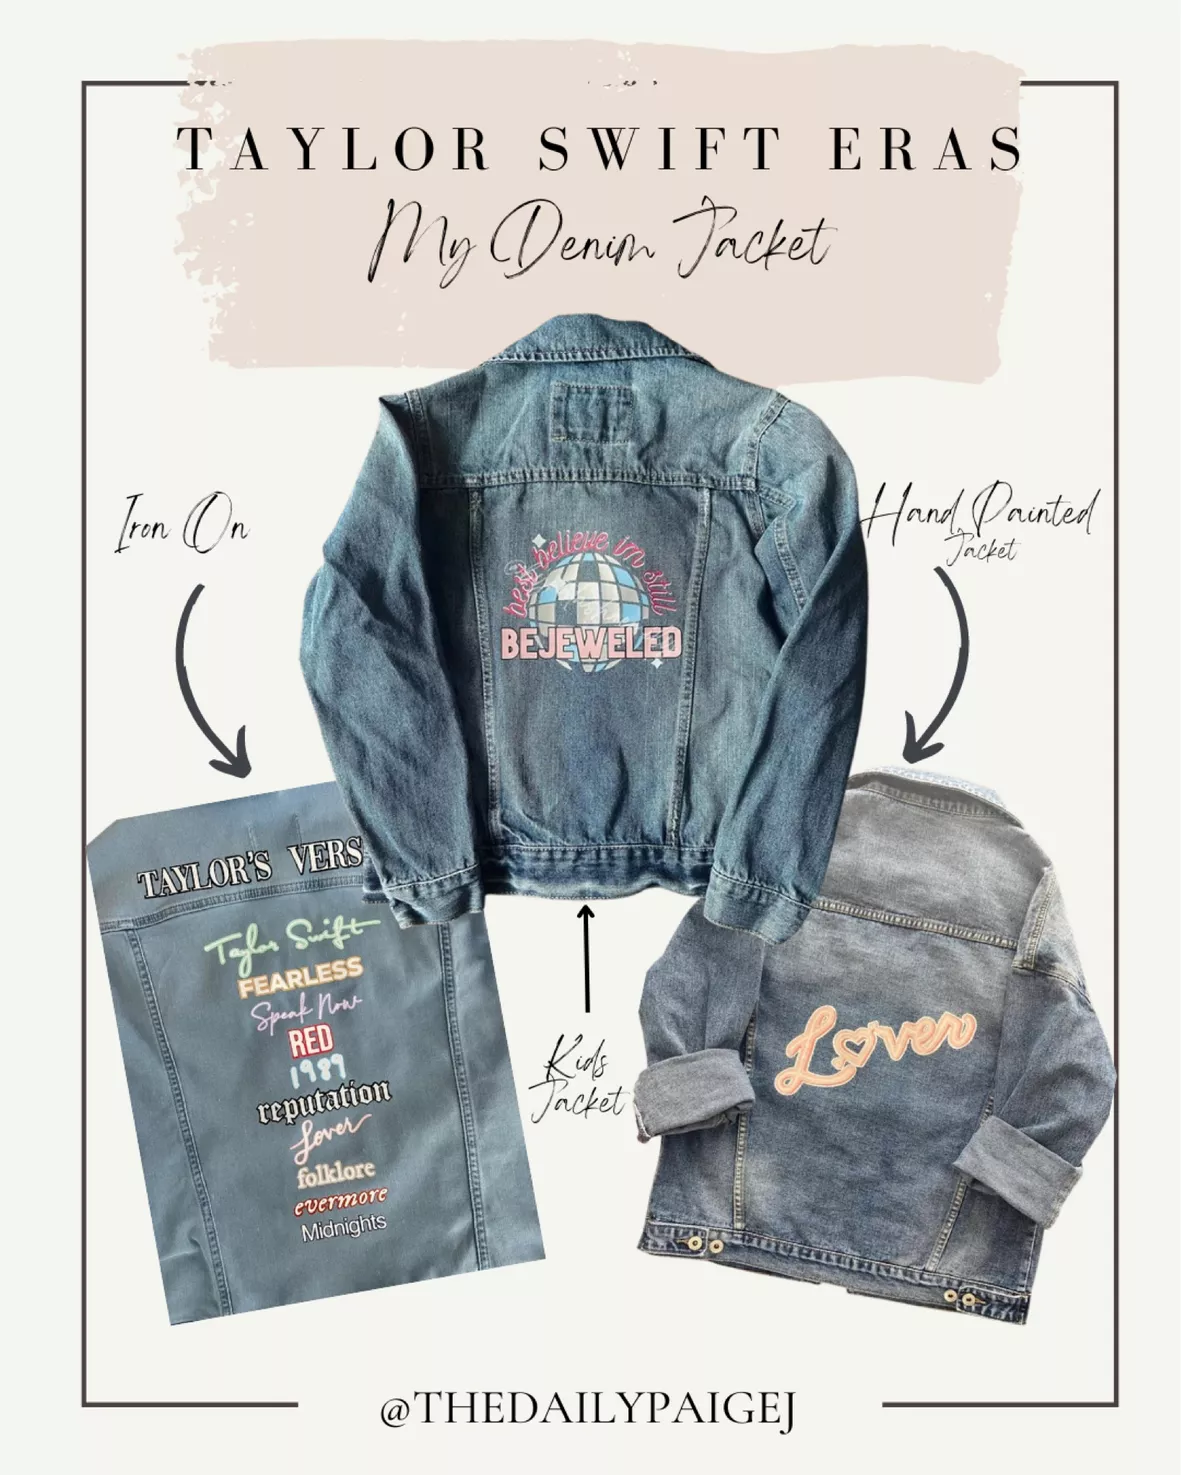 Finished my Eras Tour denim jacket and couldn't be more excited to wea